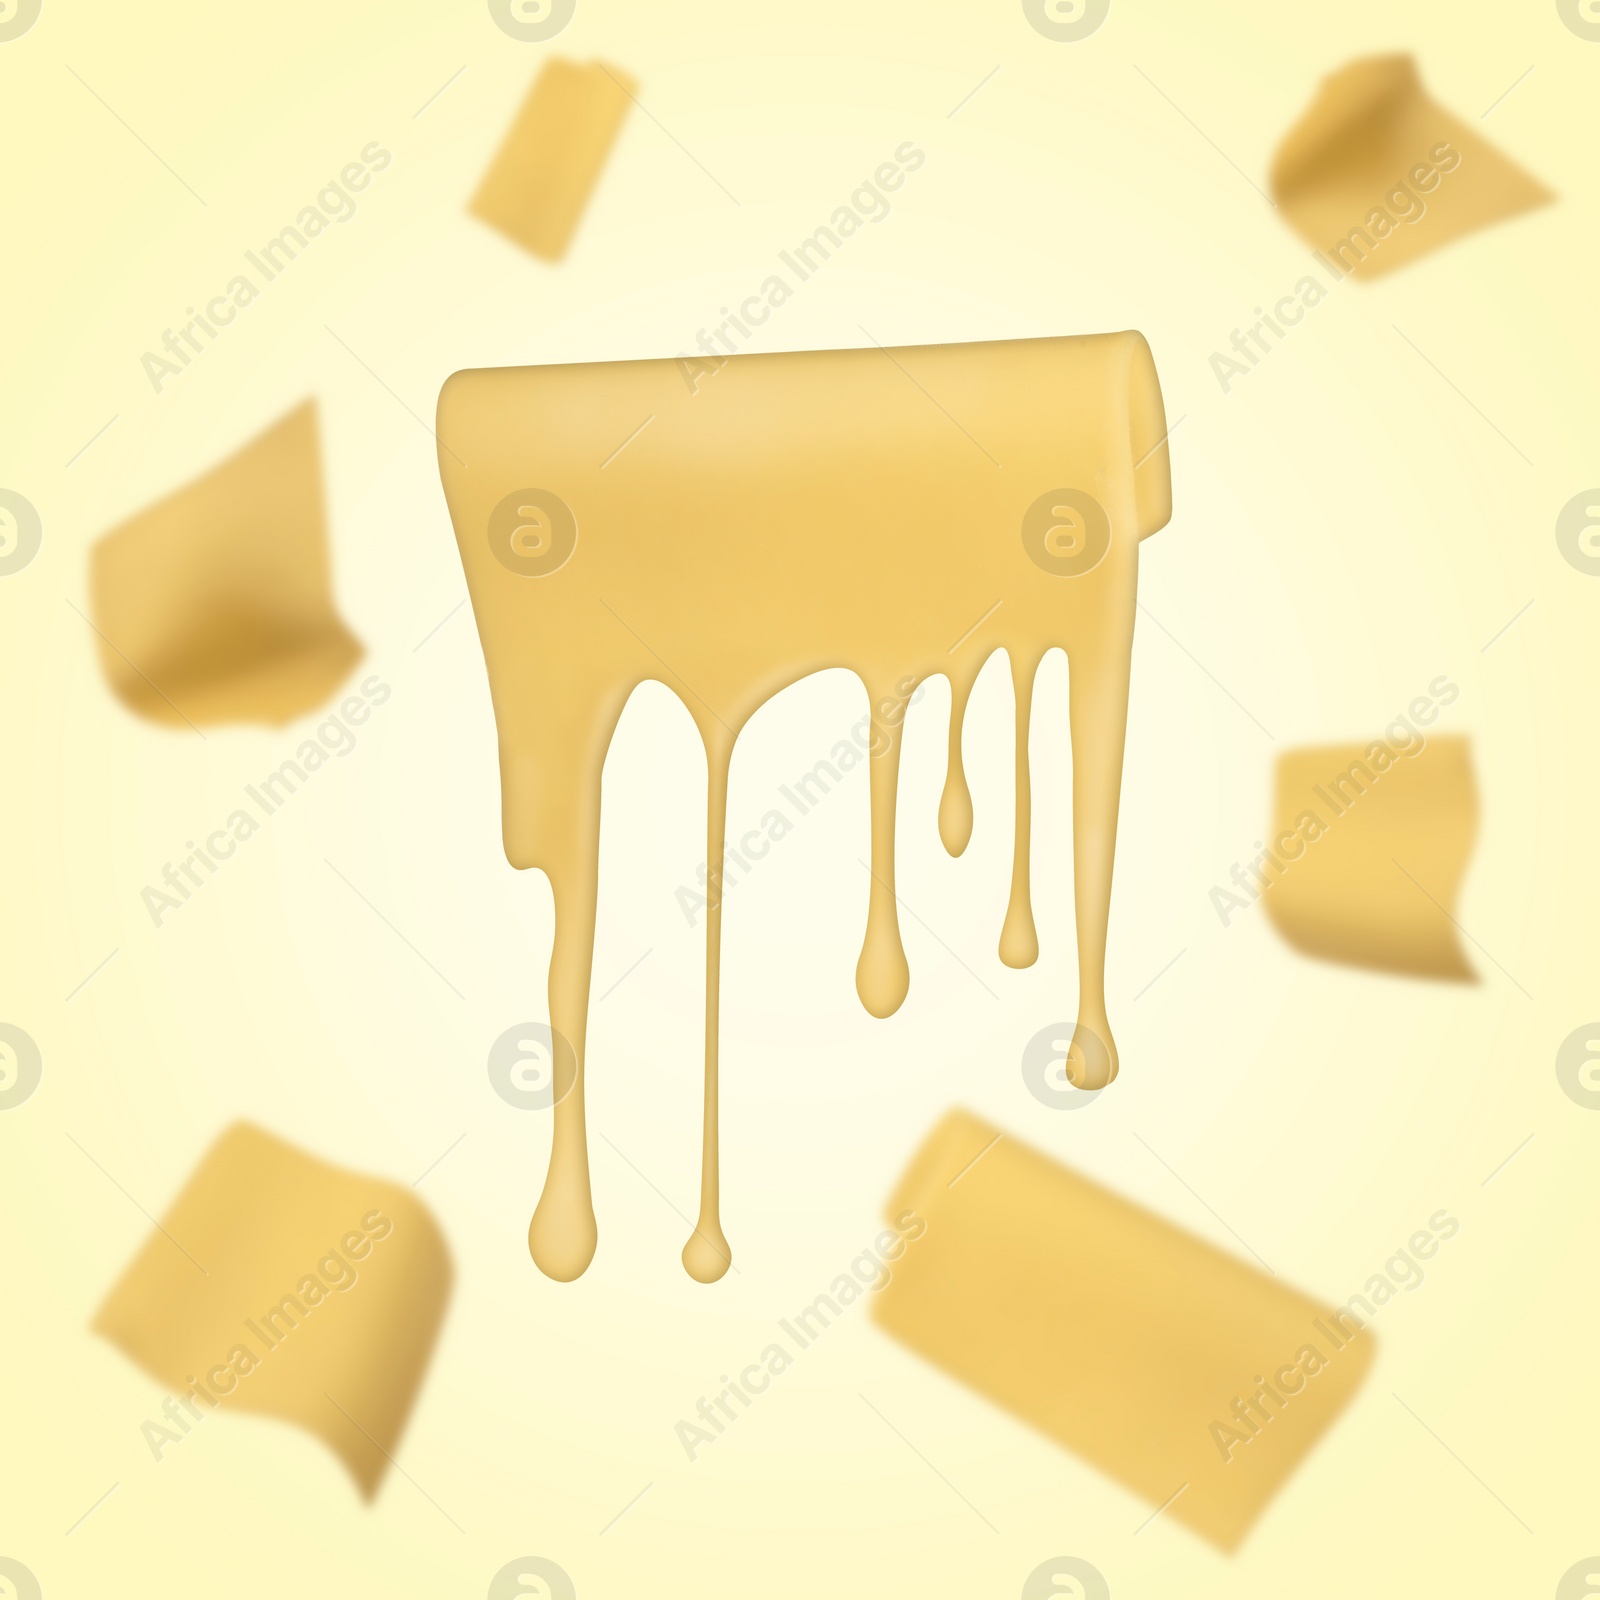 Image of Slices of cheese falling on yellow background